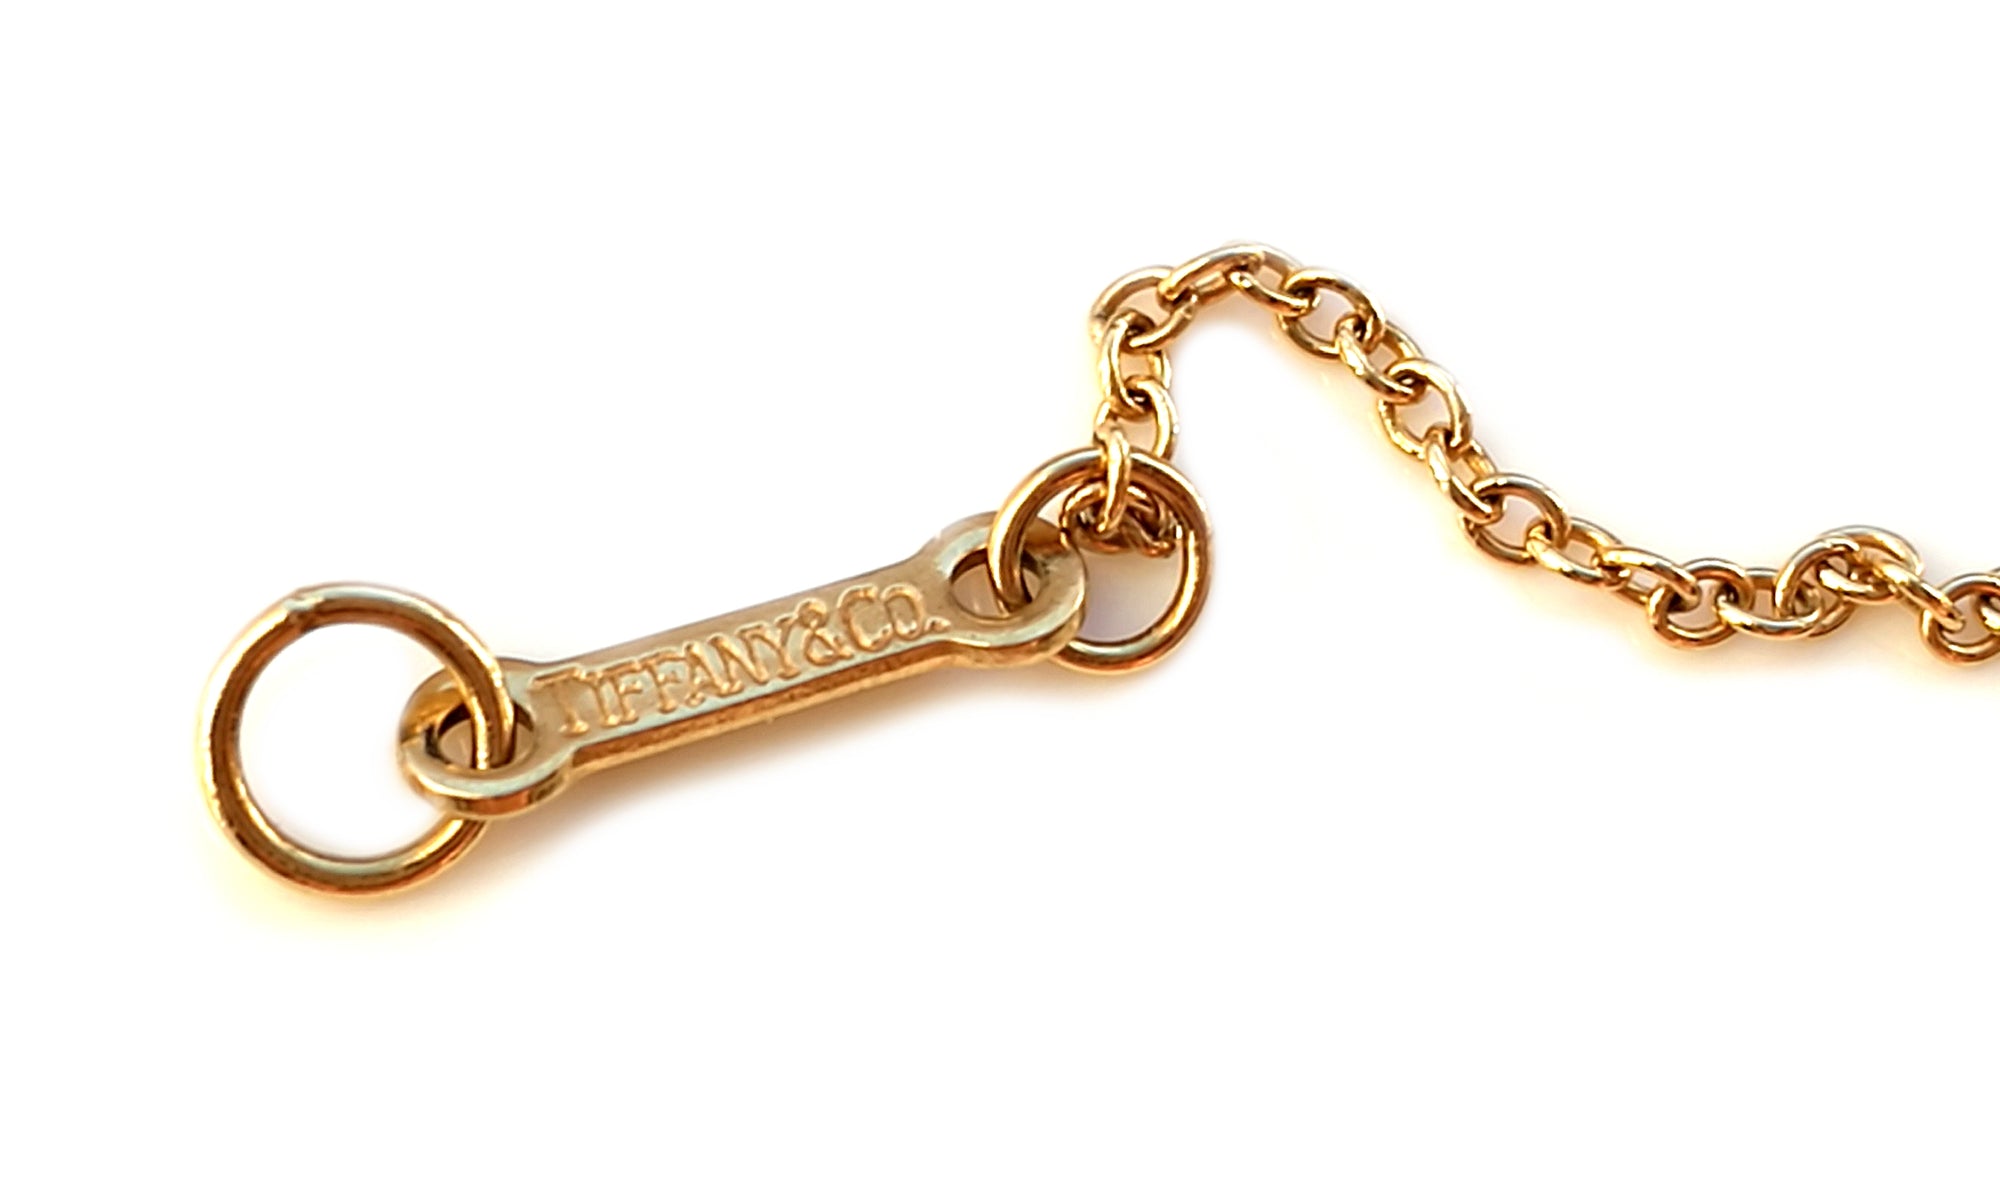 Tiffany & Co. Elsa Peretti 'Diamonds by the Yard' Bracelet in 18k Gold with Pearls